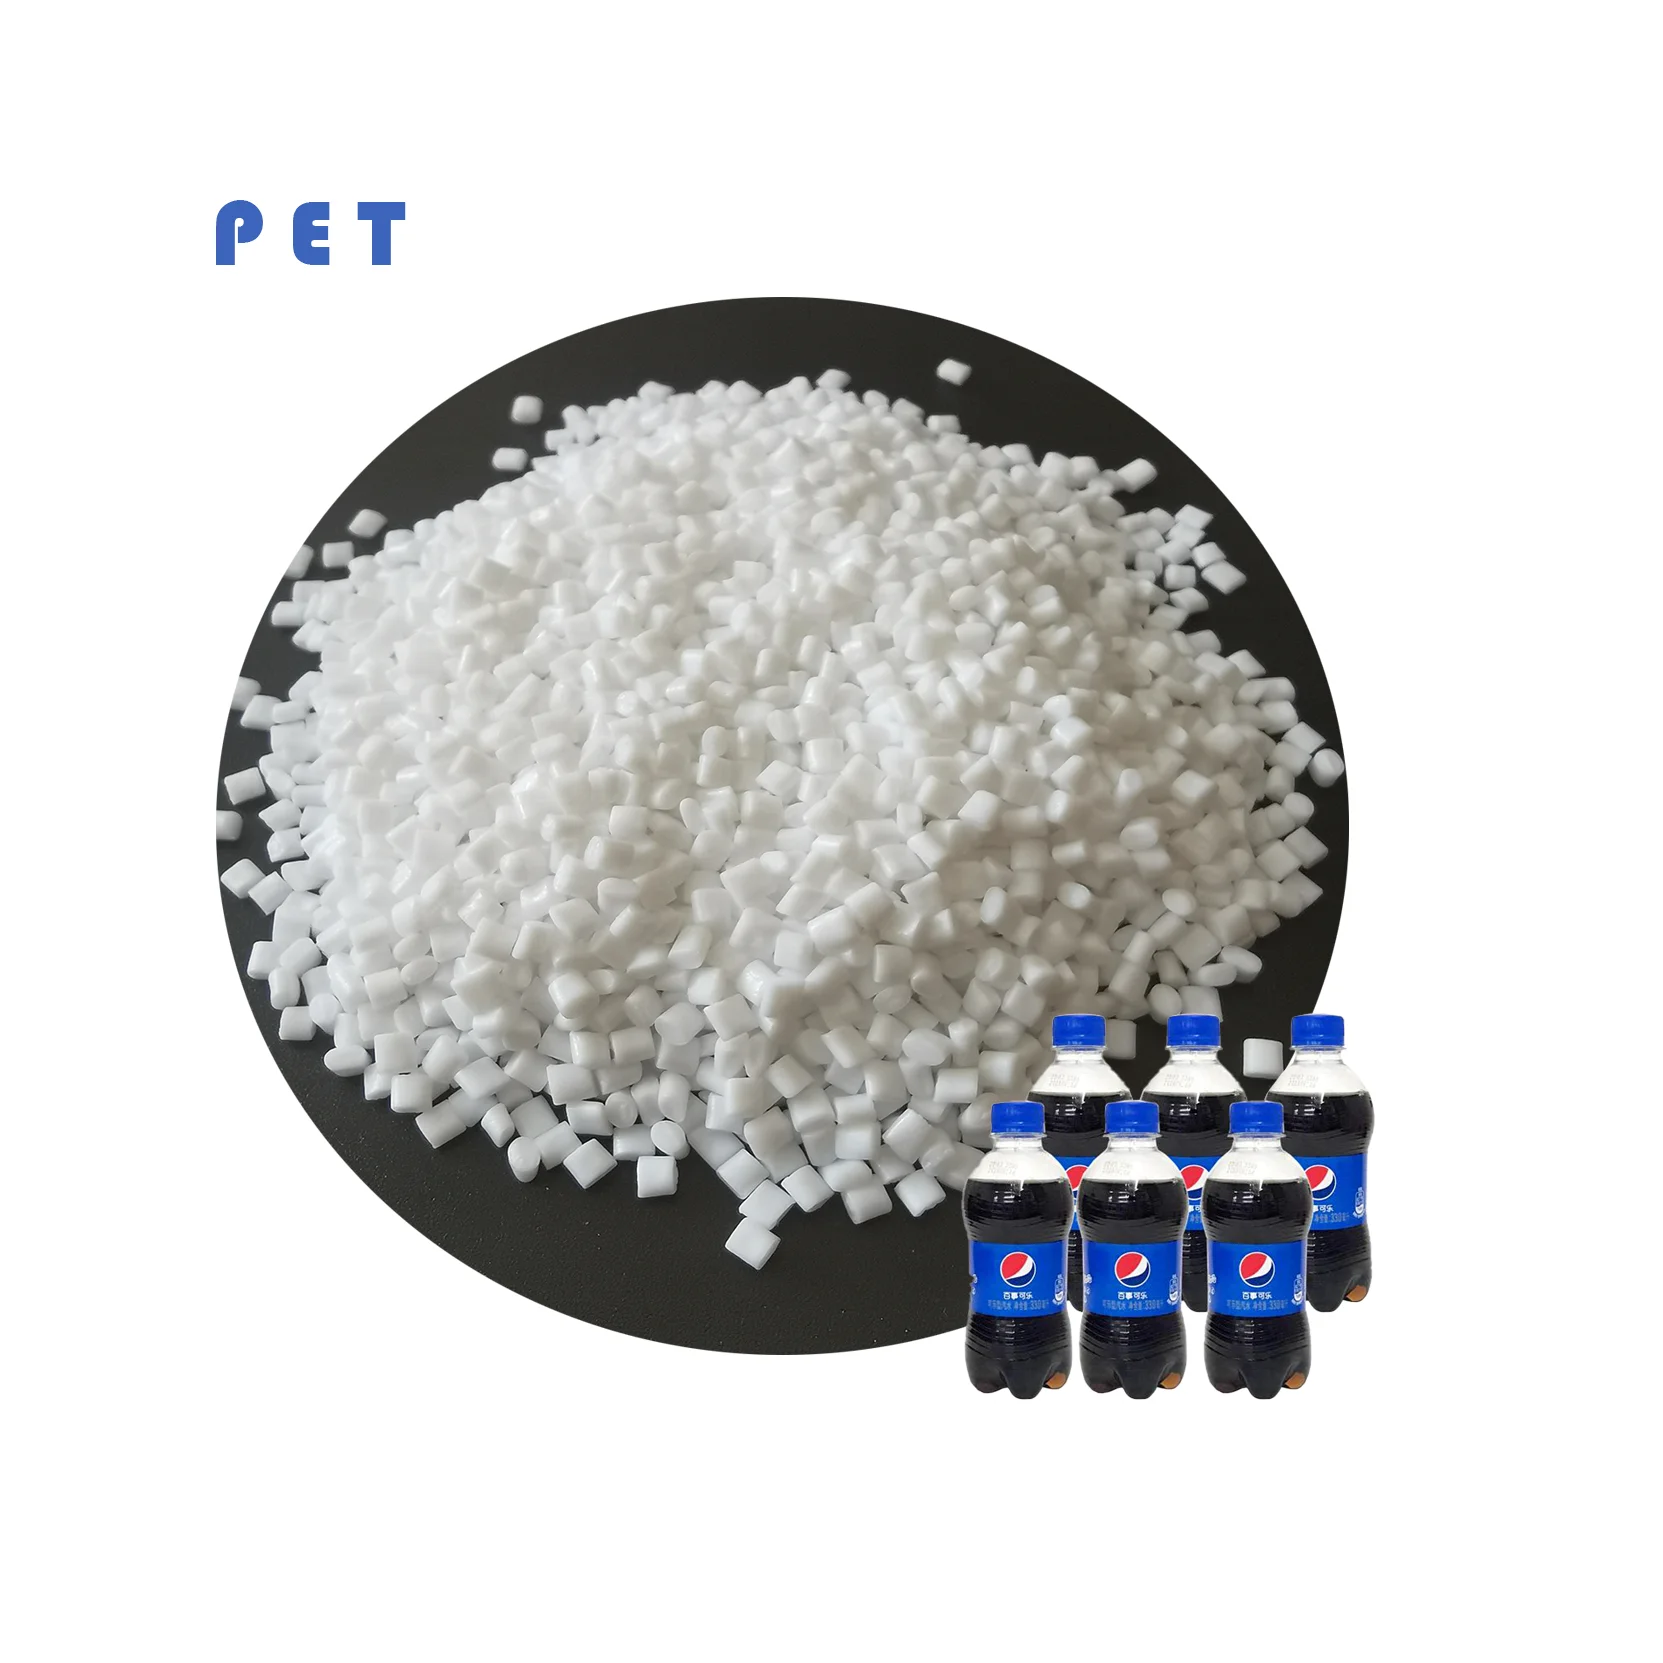 
Top quality virgin PET resin bottle grade from biggest Chinese manufacturers  (1600213332844)